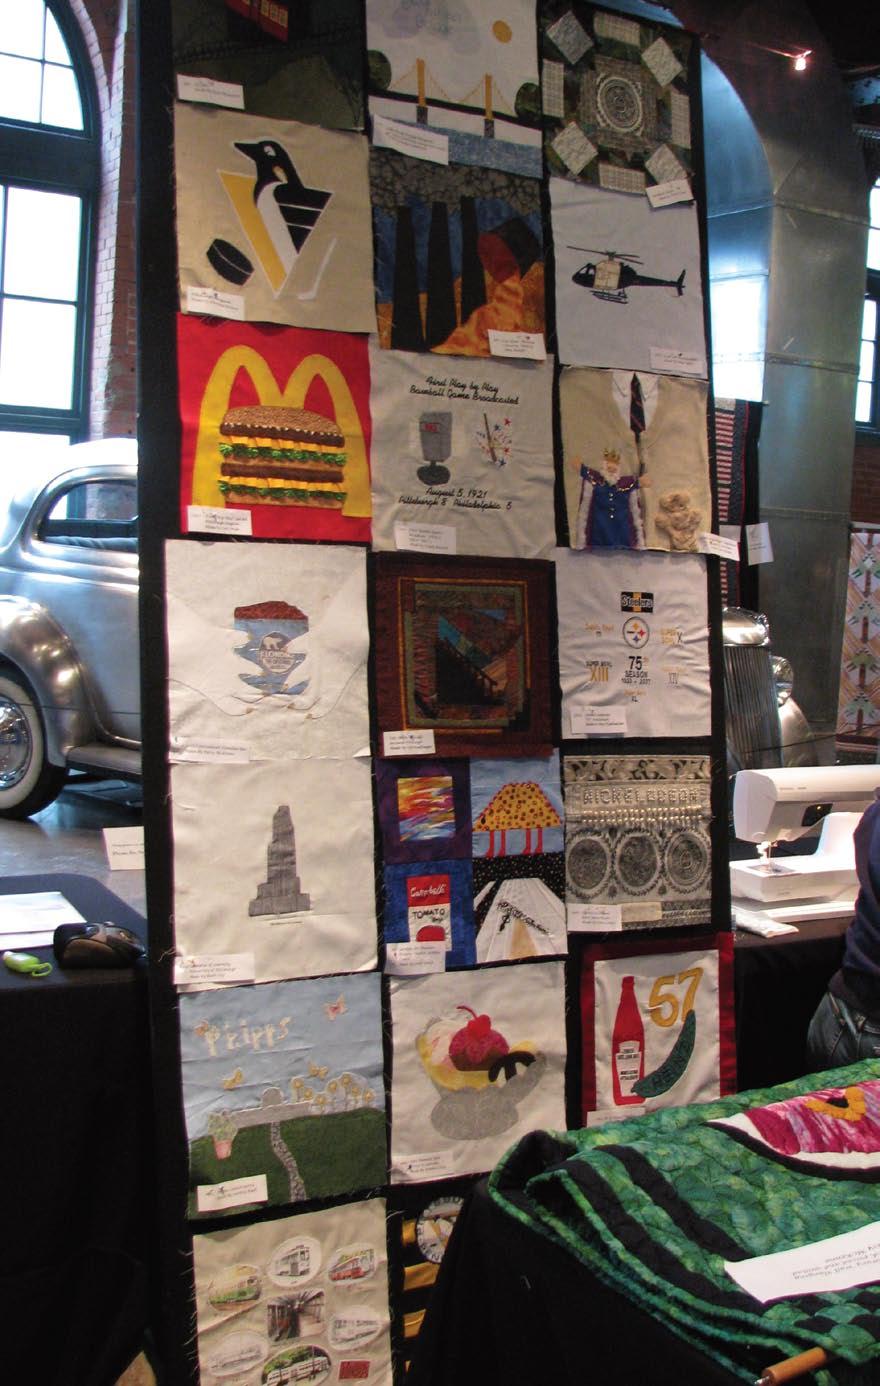 The event was not intended to be another quilt show.